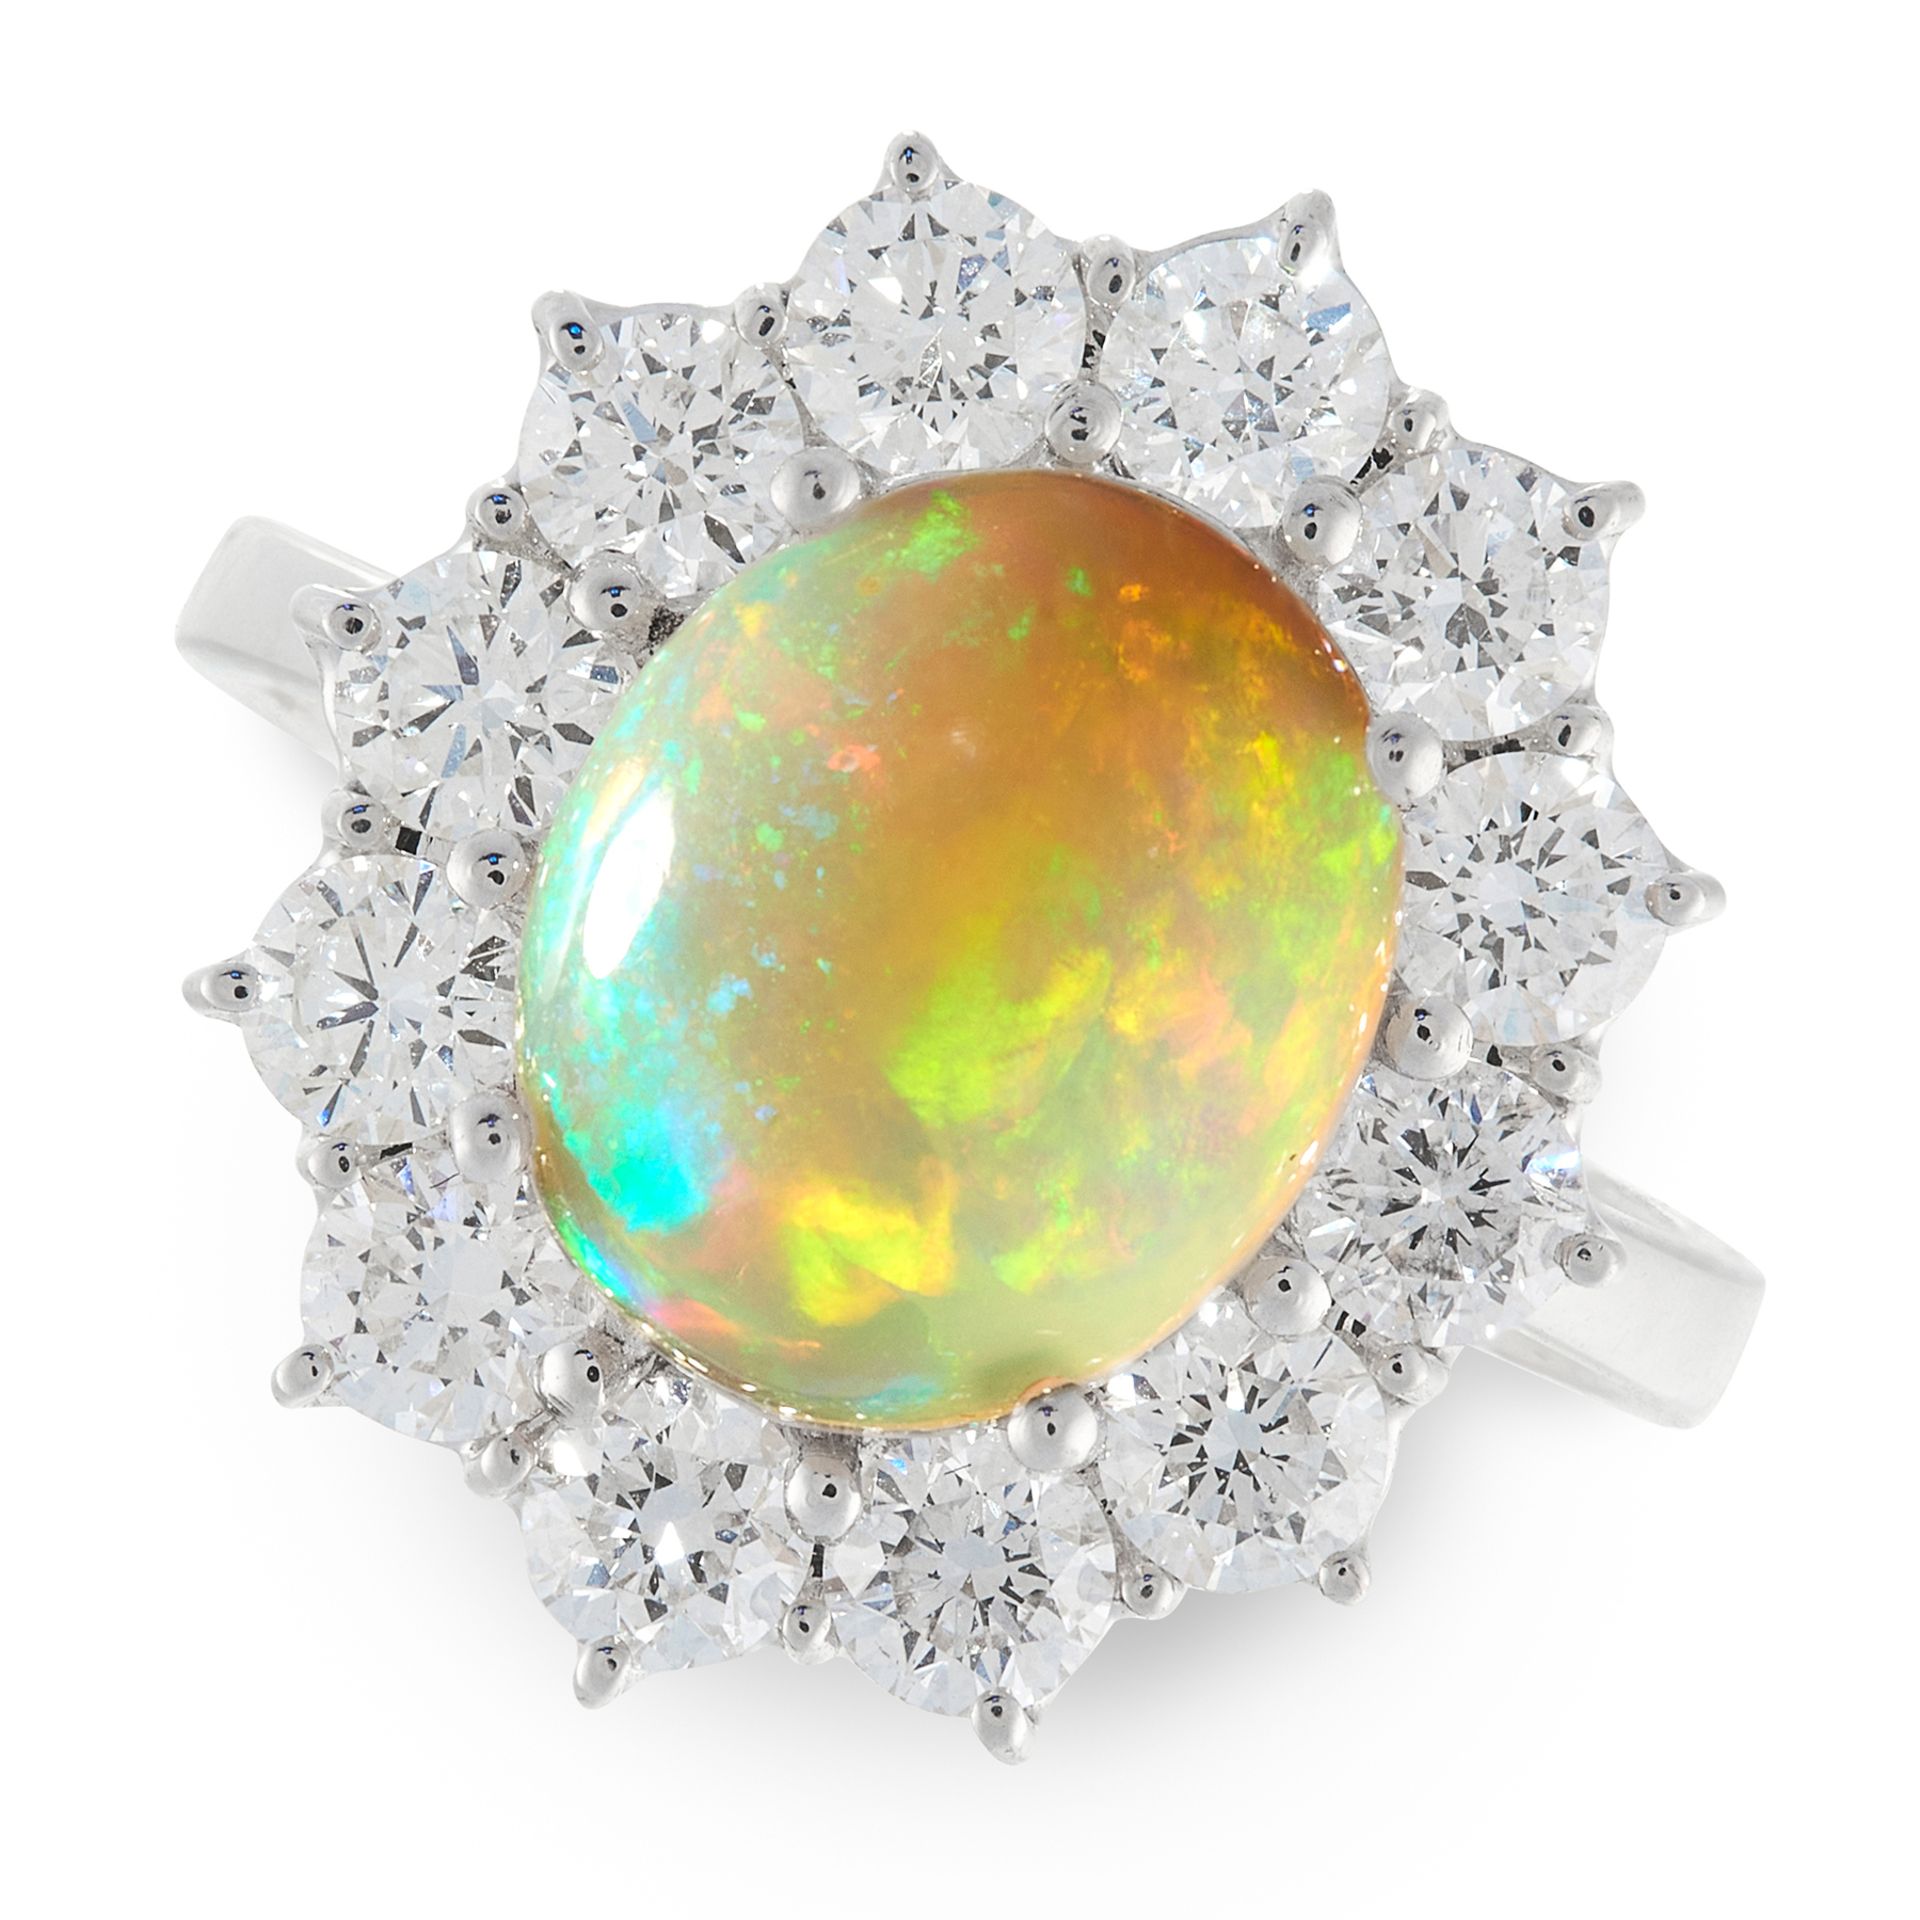 A OPAL AND DIAMOND CLUSTER RING in 18ct white gold, set with a cabochon opal of 2.87 carats in a